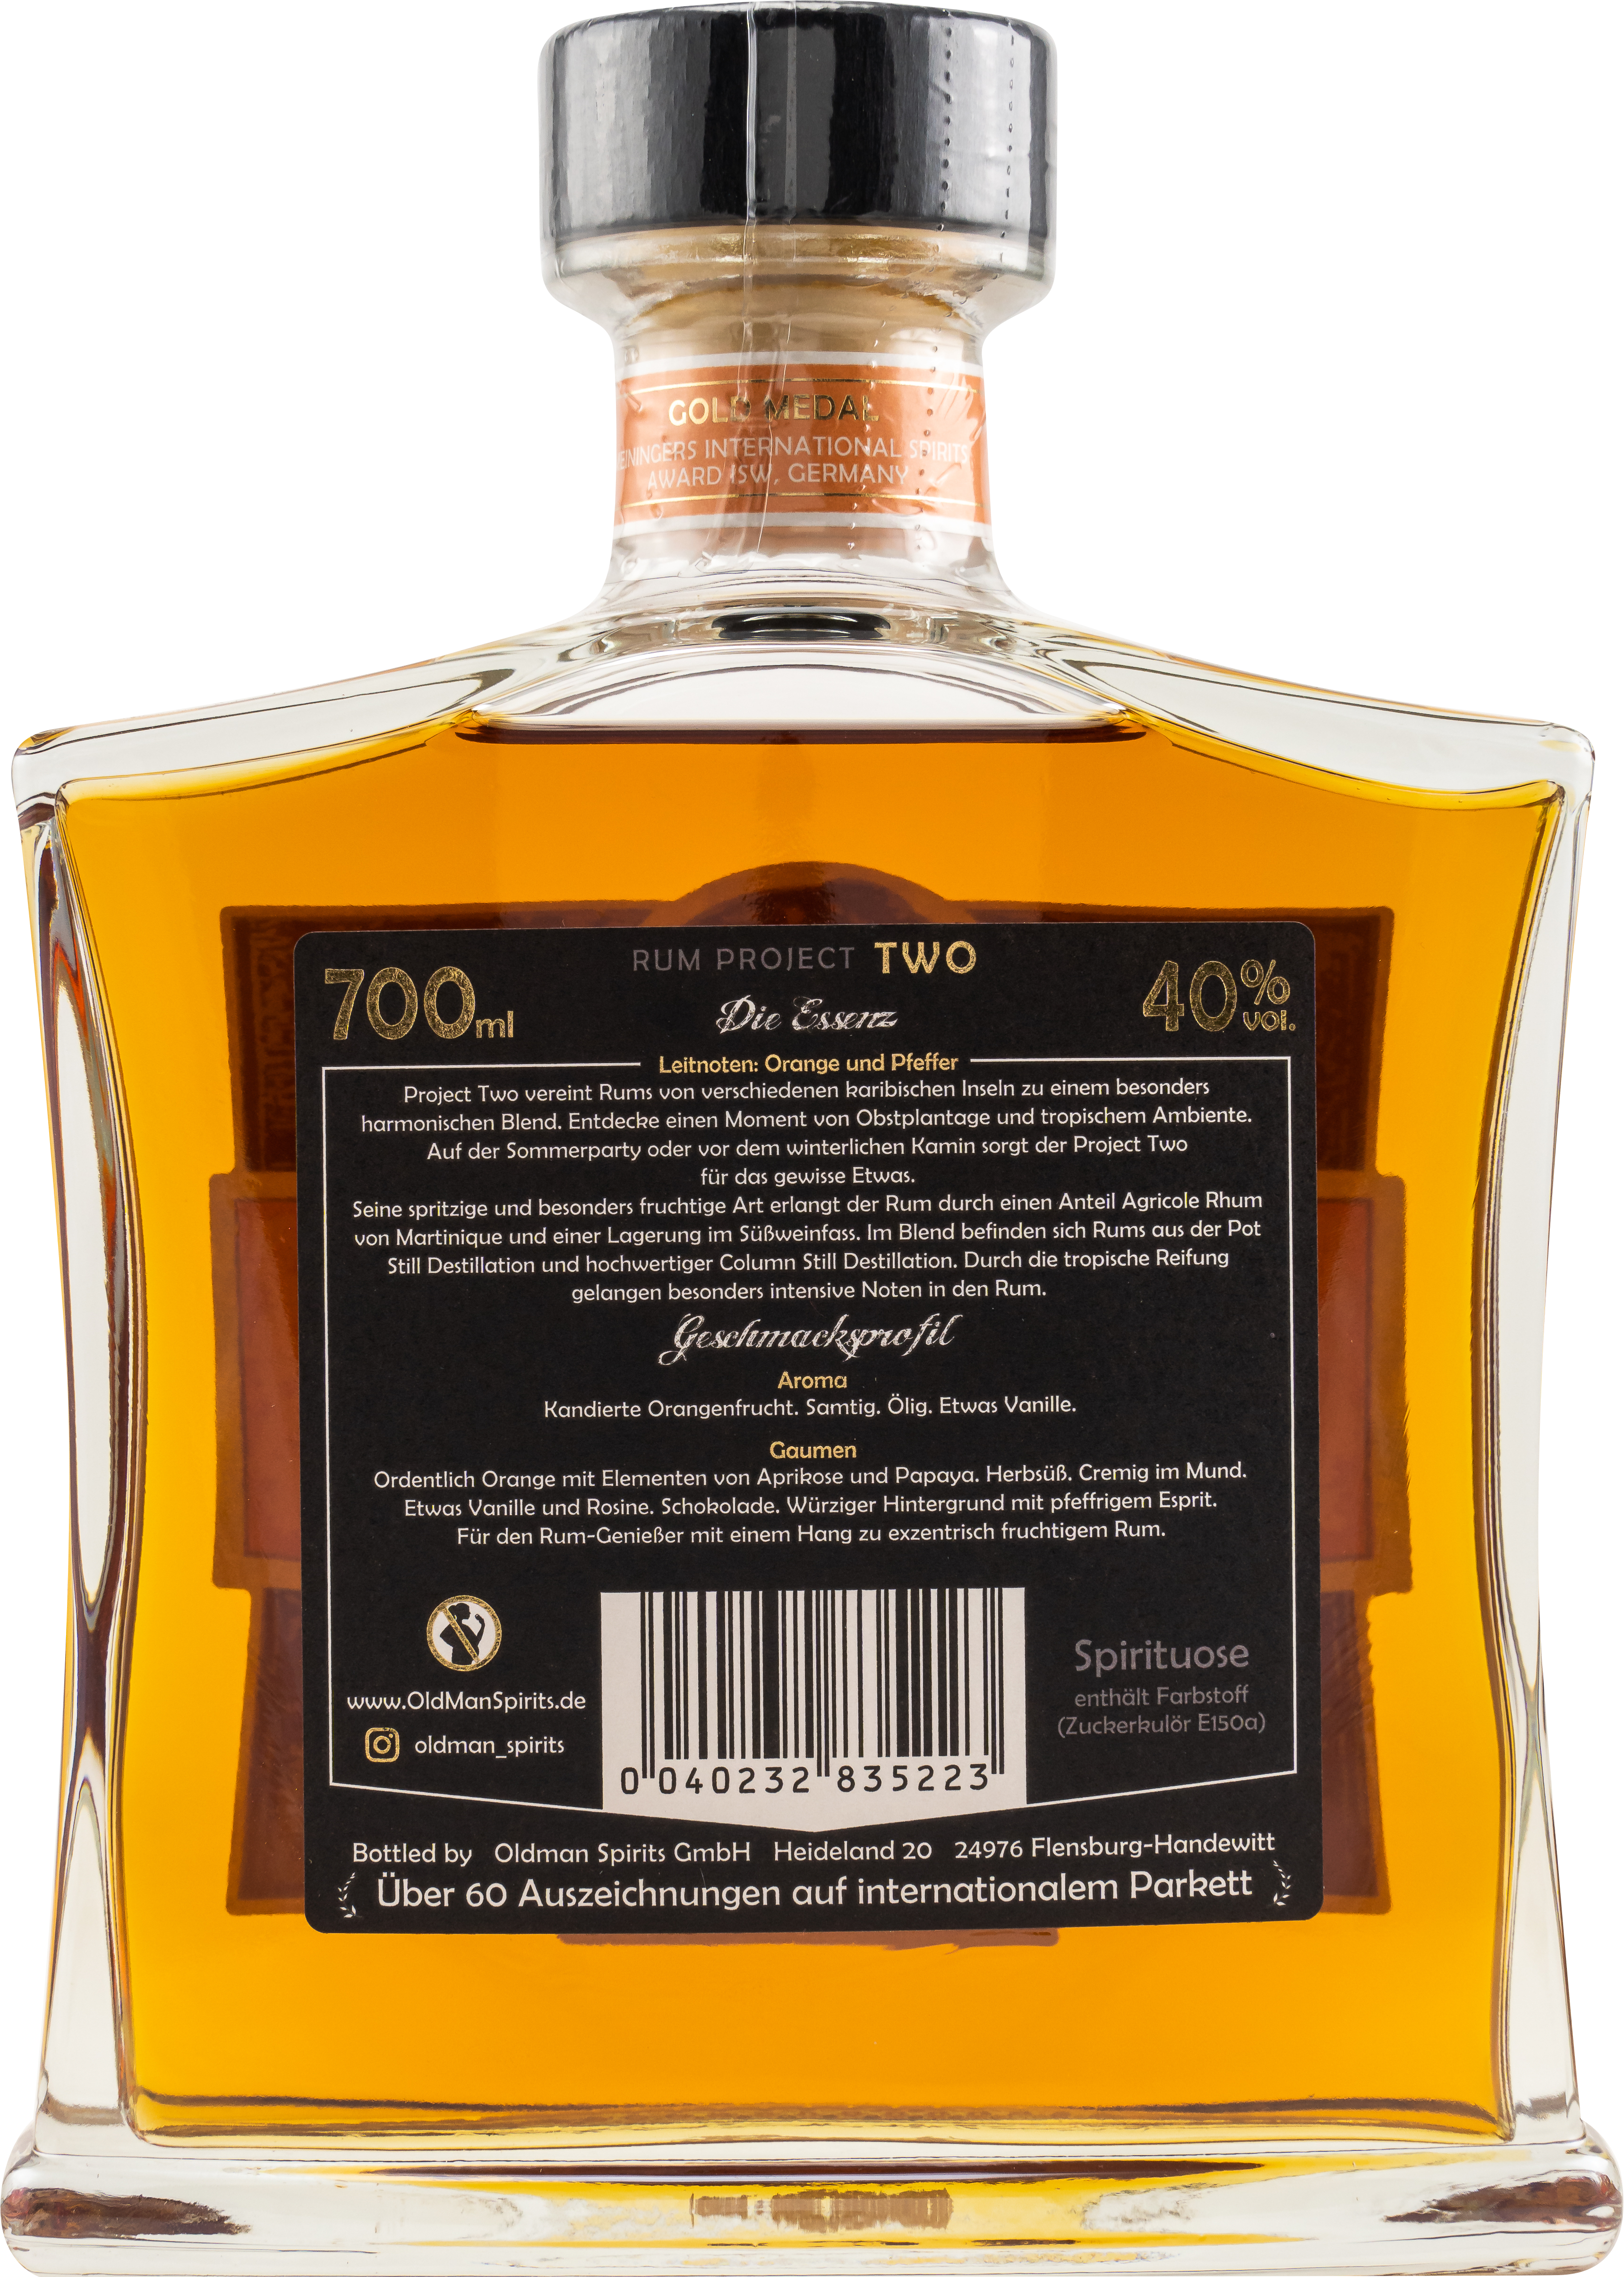 "Rum Project Two" (Spiced Orange) by Spirits of Old Man 40% 0,7l